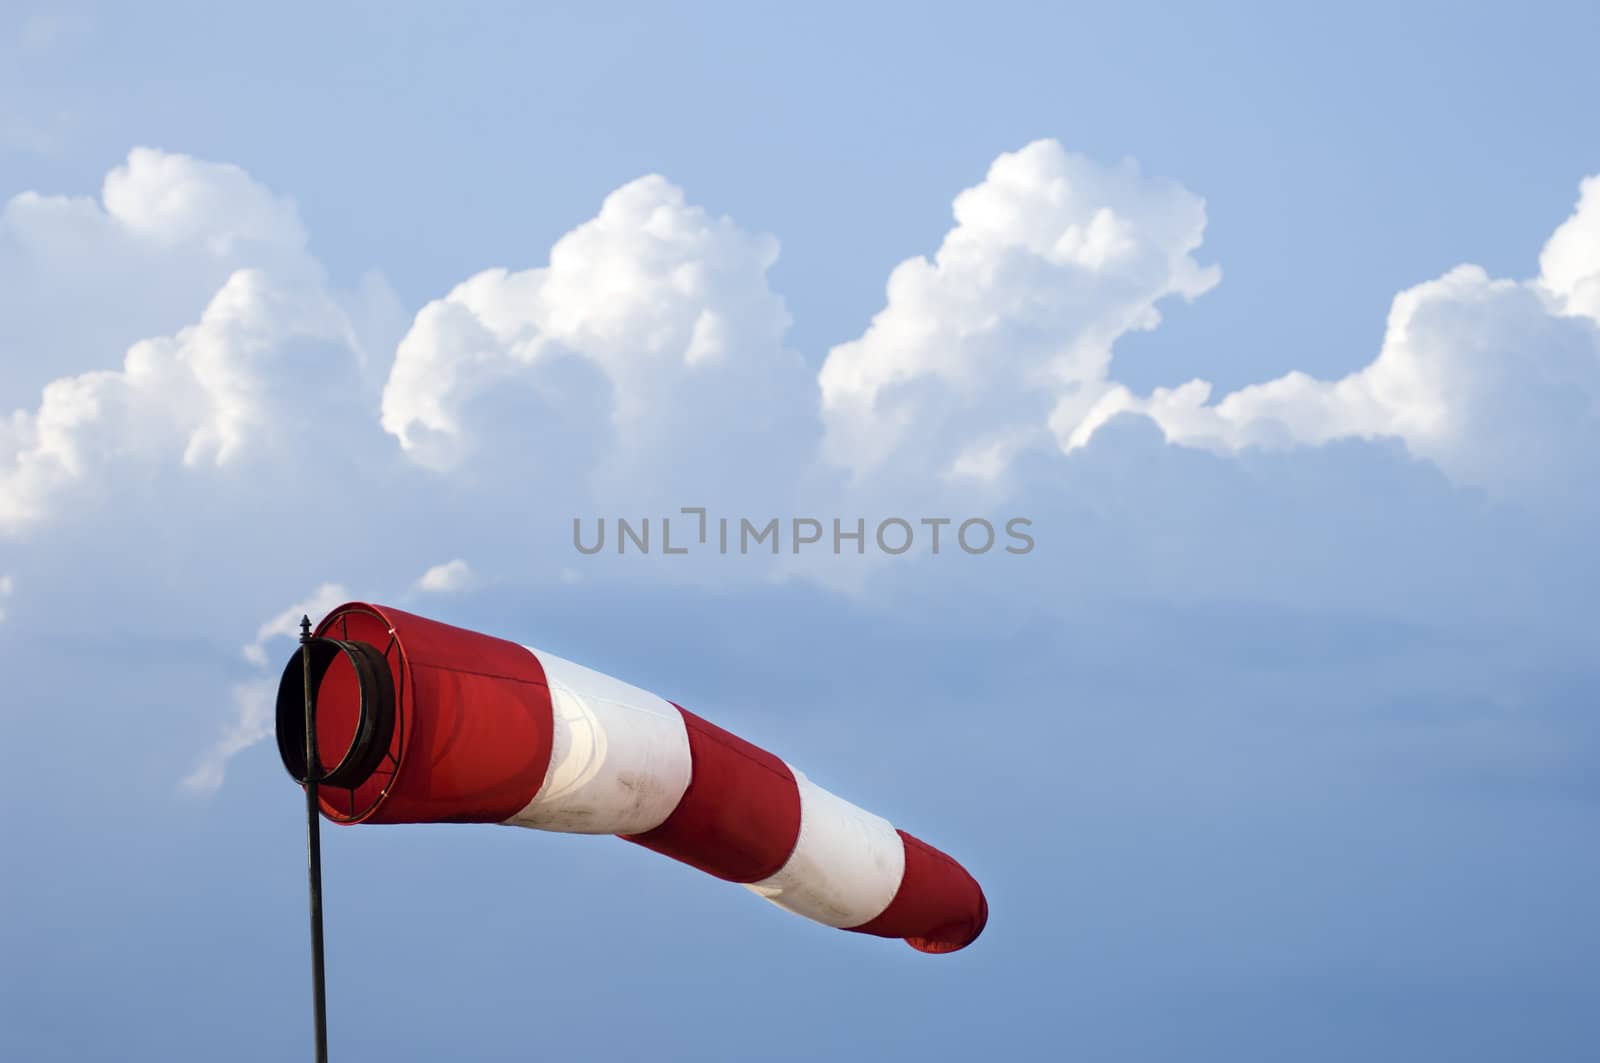 Windsock close-up against the blue sky with clouds